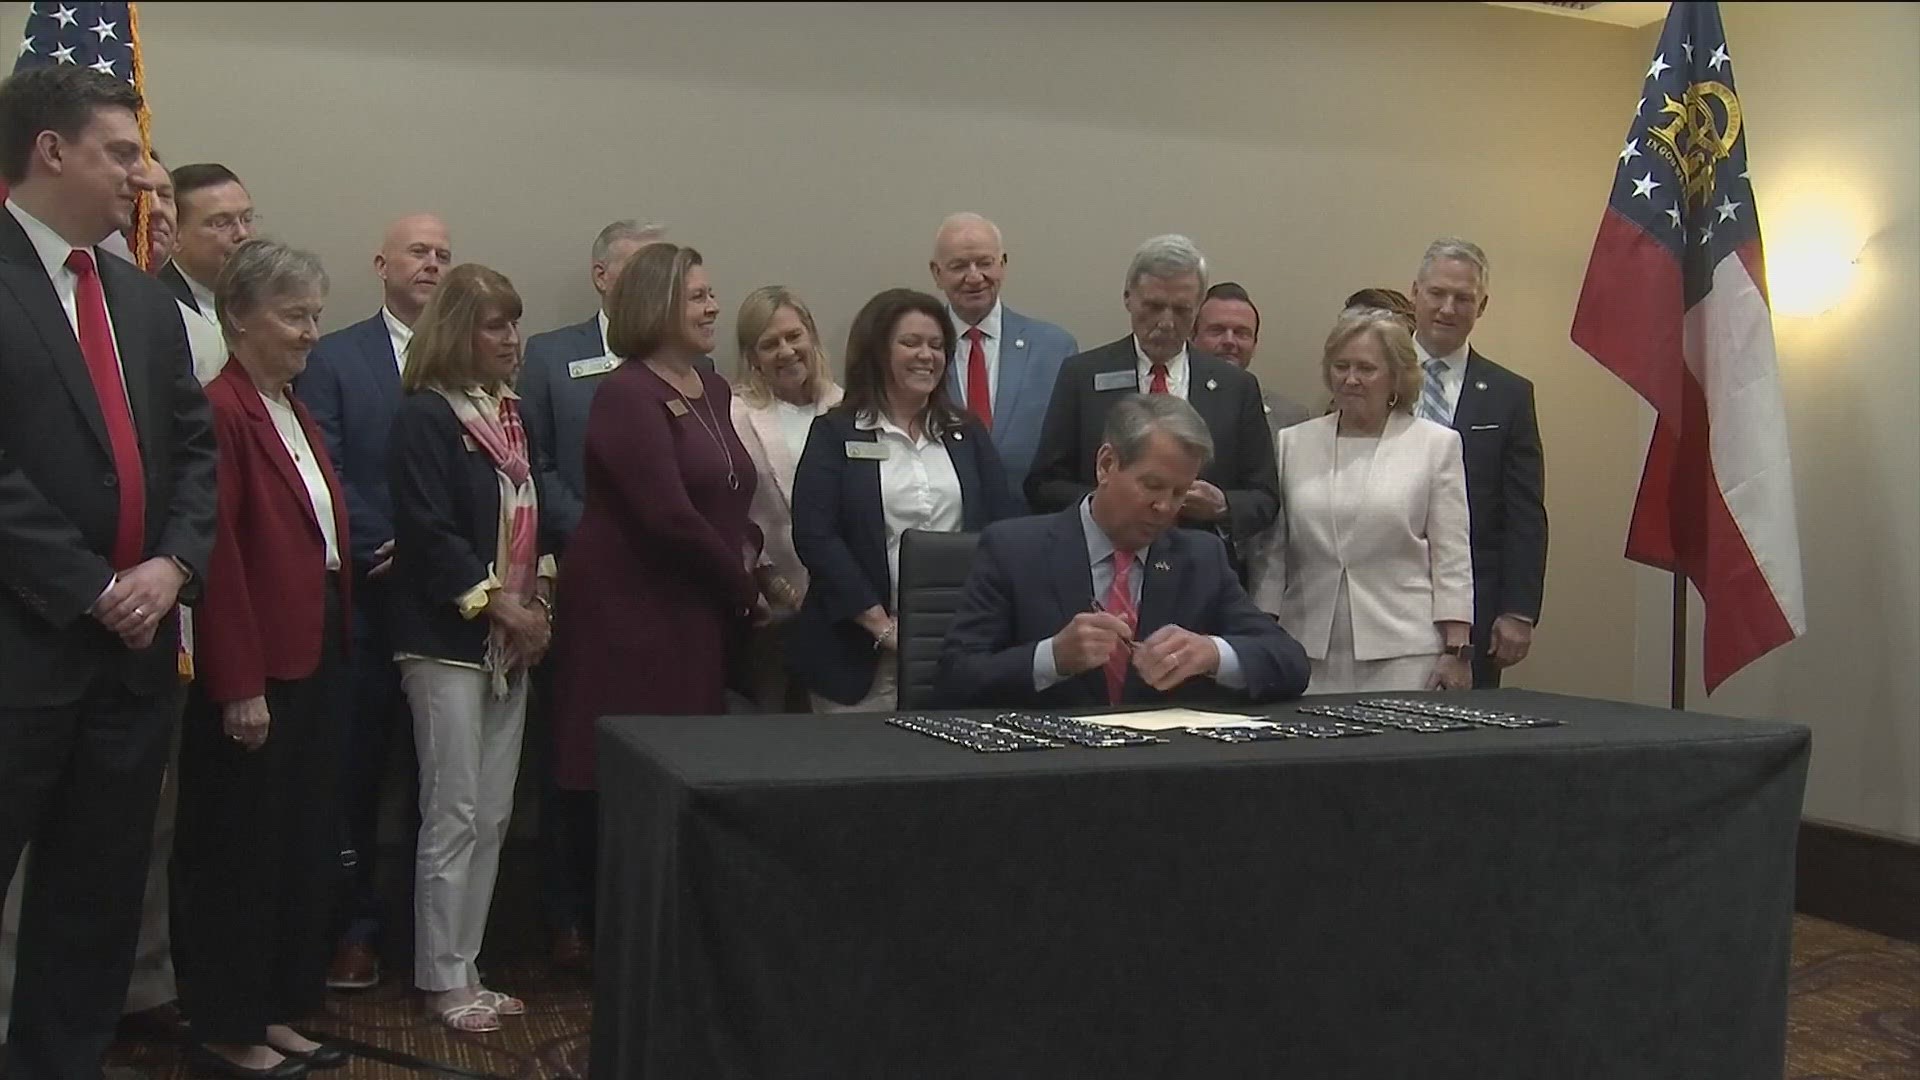 The Georgia governor signed the bills on Thursday. According to his office, the bills would further strengthen schools all around the Peach State.